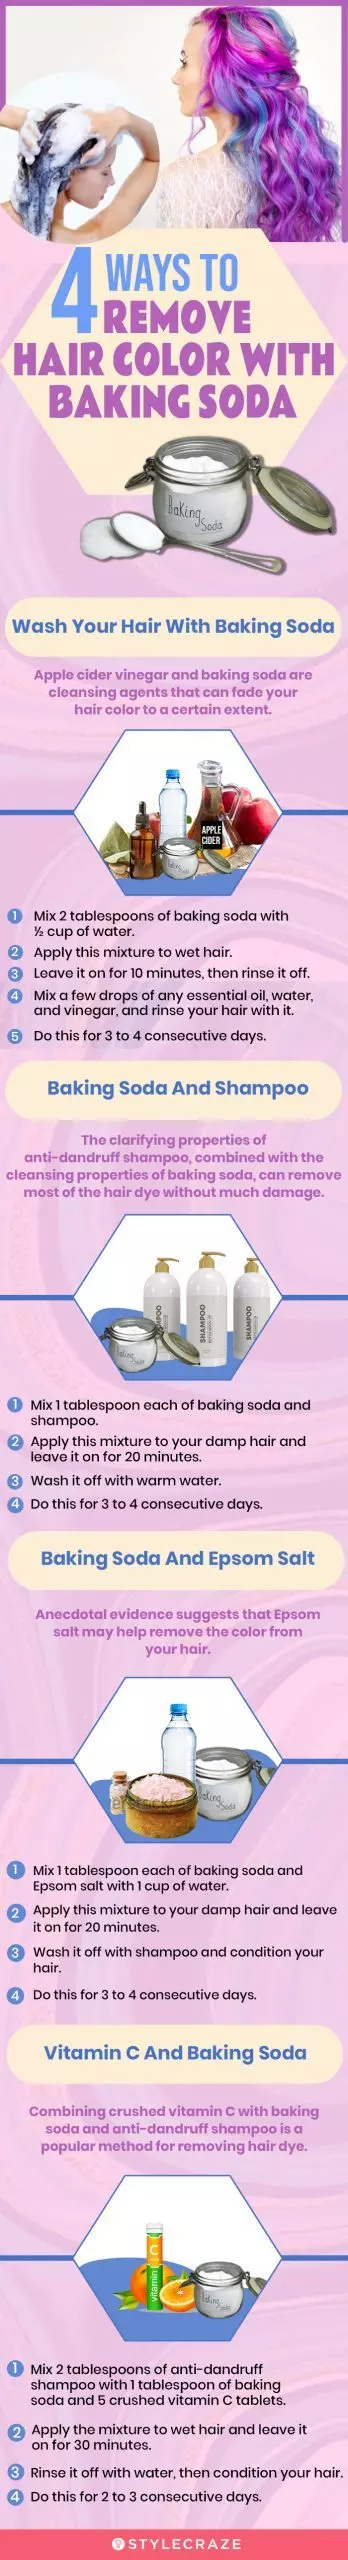 4 ways to remove haircolor with baking soda (infographic)